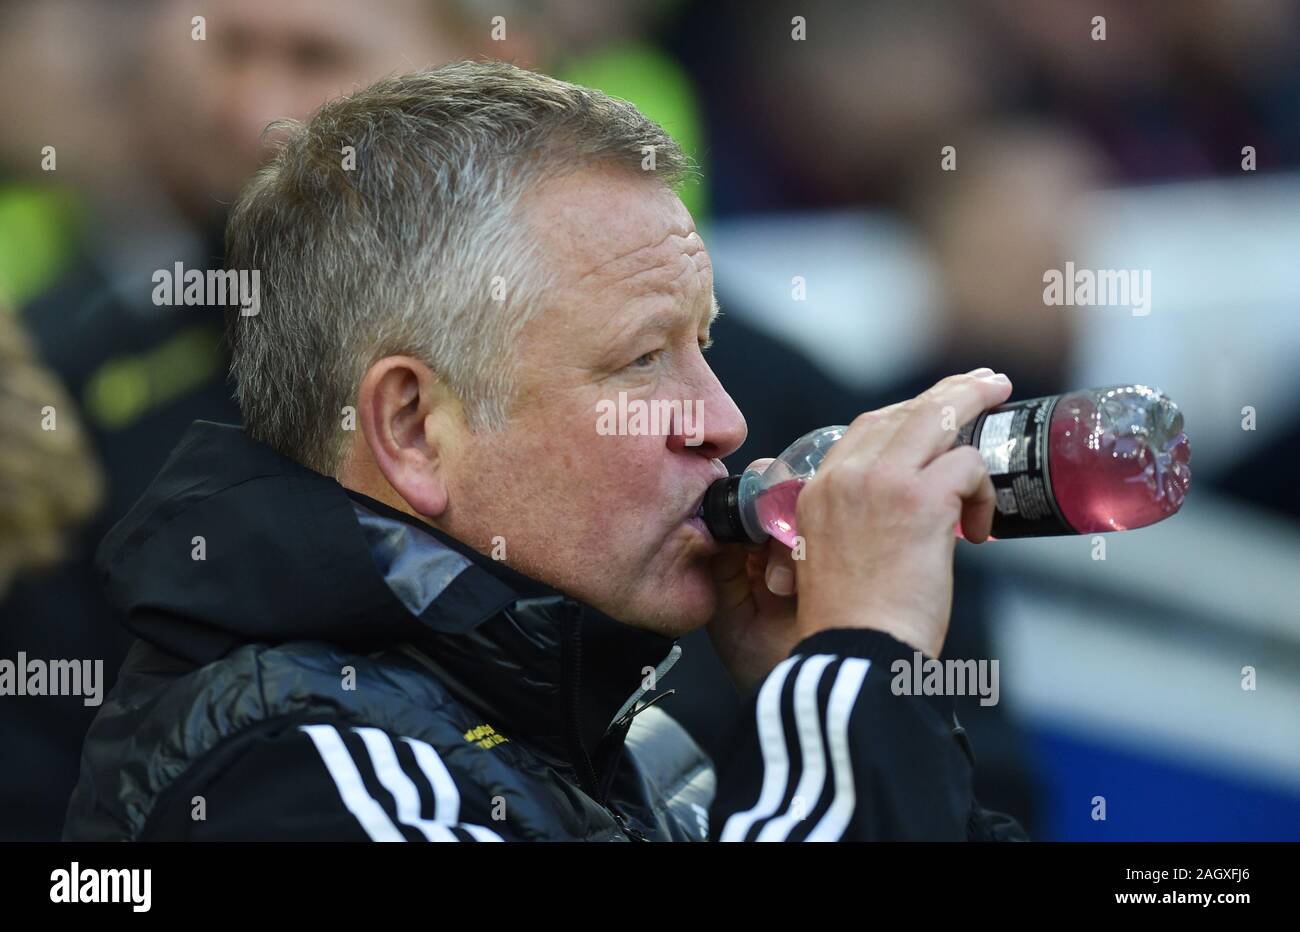 Sheffield United manager Chris Wilder during the Premier League match between Brighton and Hove Albion and Sheffield United at The Amex Stadium Brighton, UK - 21st December 2019 - Editorial use only. No merchandising. For Football images FA and Premier League restrictions apply inc. no internet/mobile usage without FAPL license - for details contact Football Dataco Stock Photo